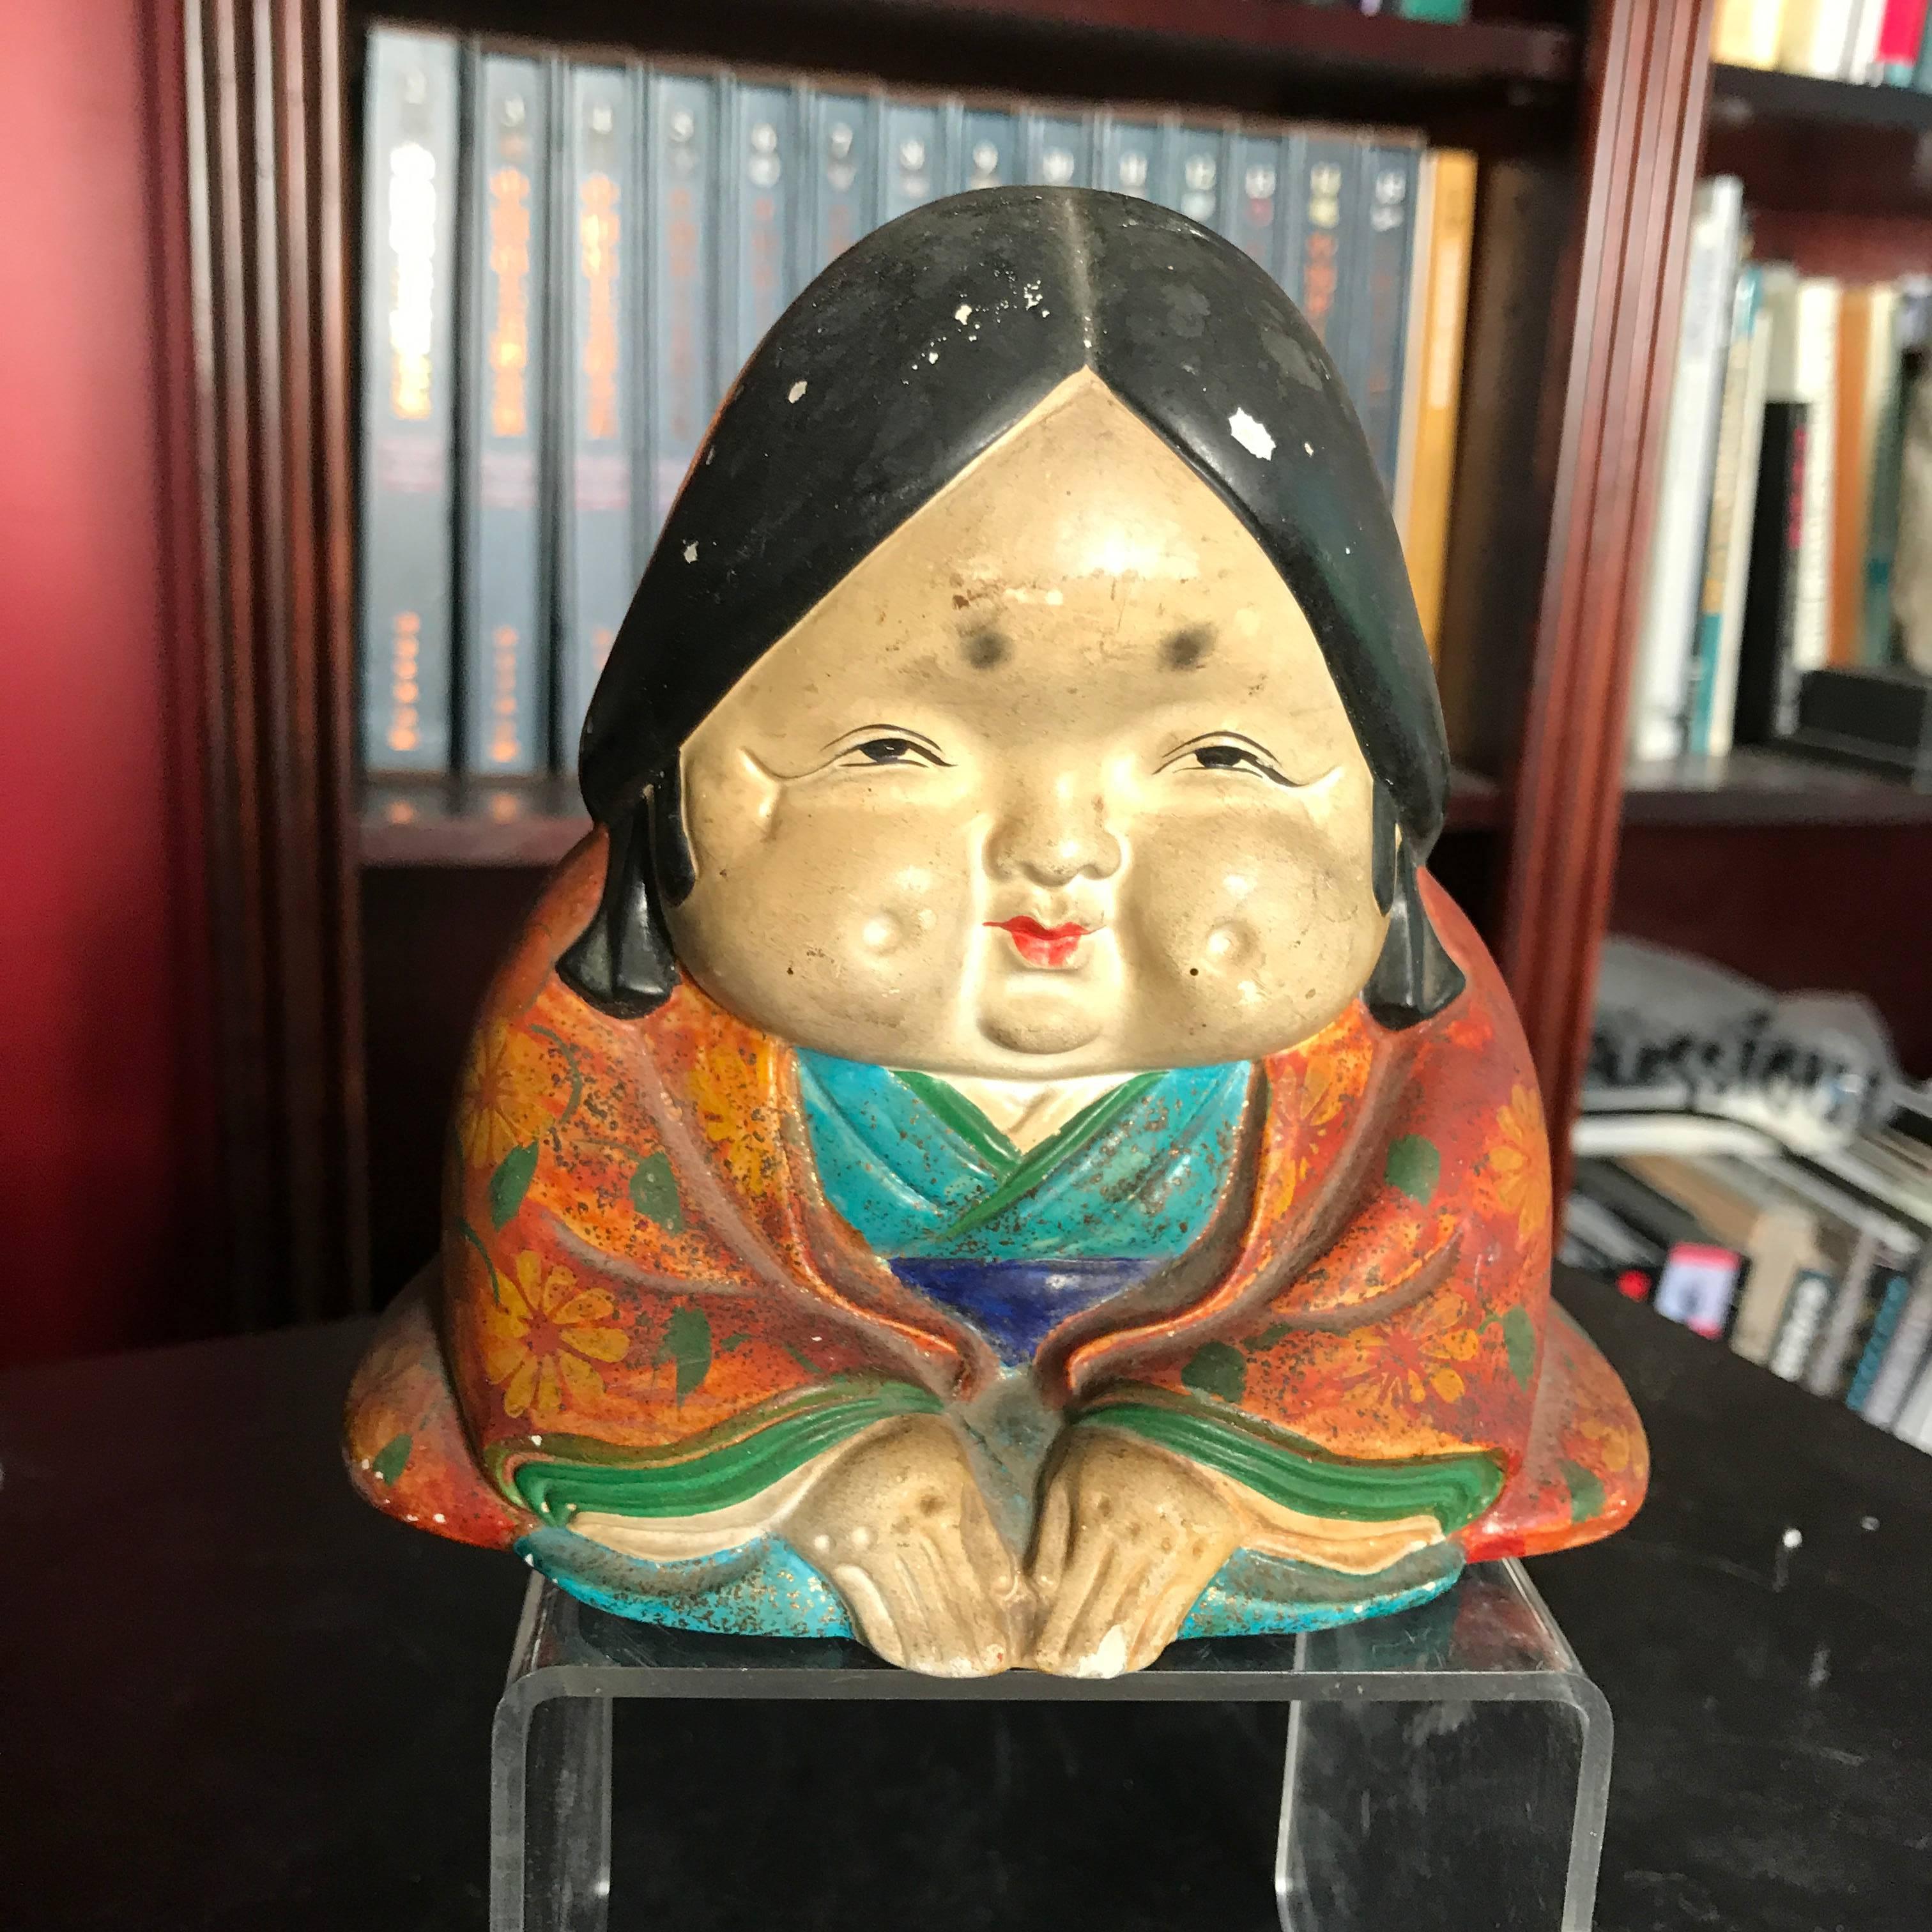 Hand-Crafted Japanese Ceramic Doll Okame, Hand-Painted Gem from Early 20th Century